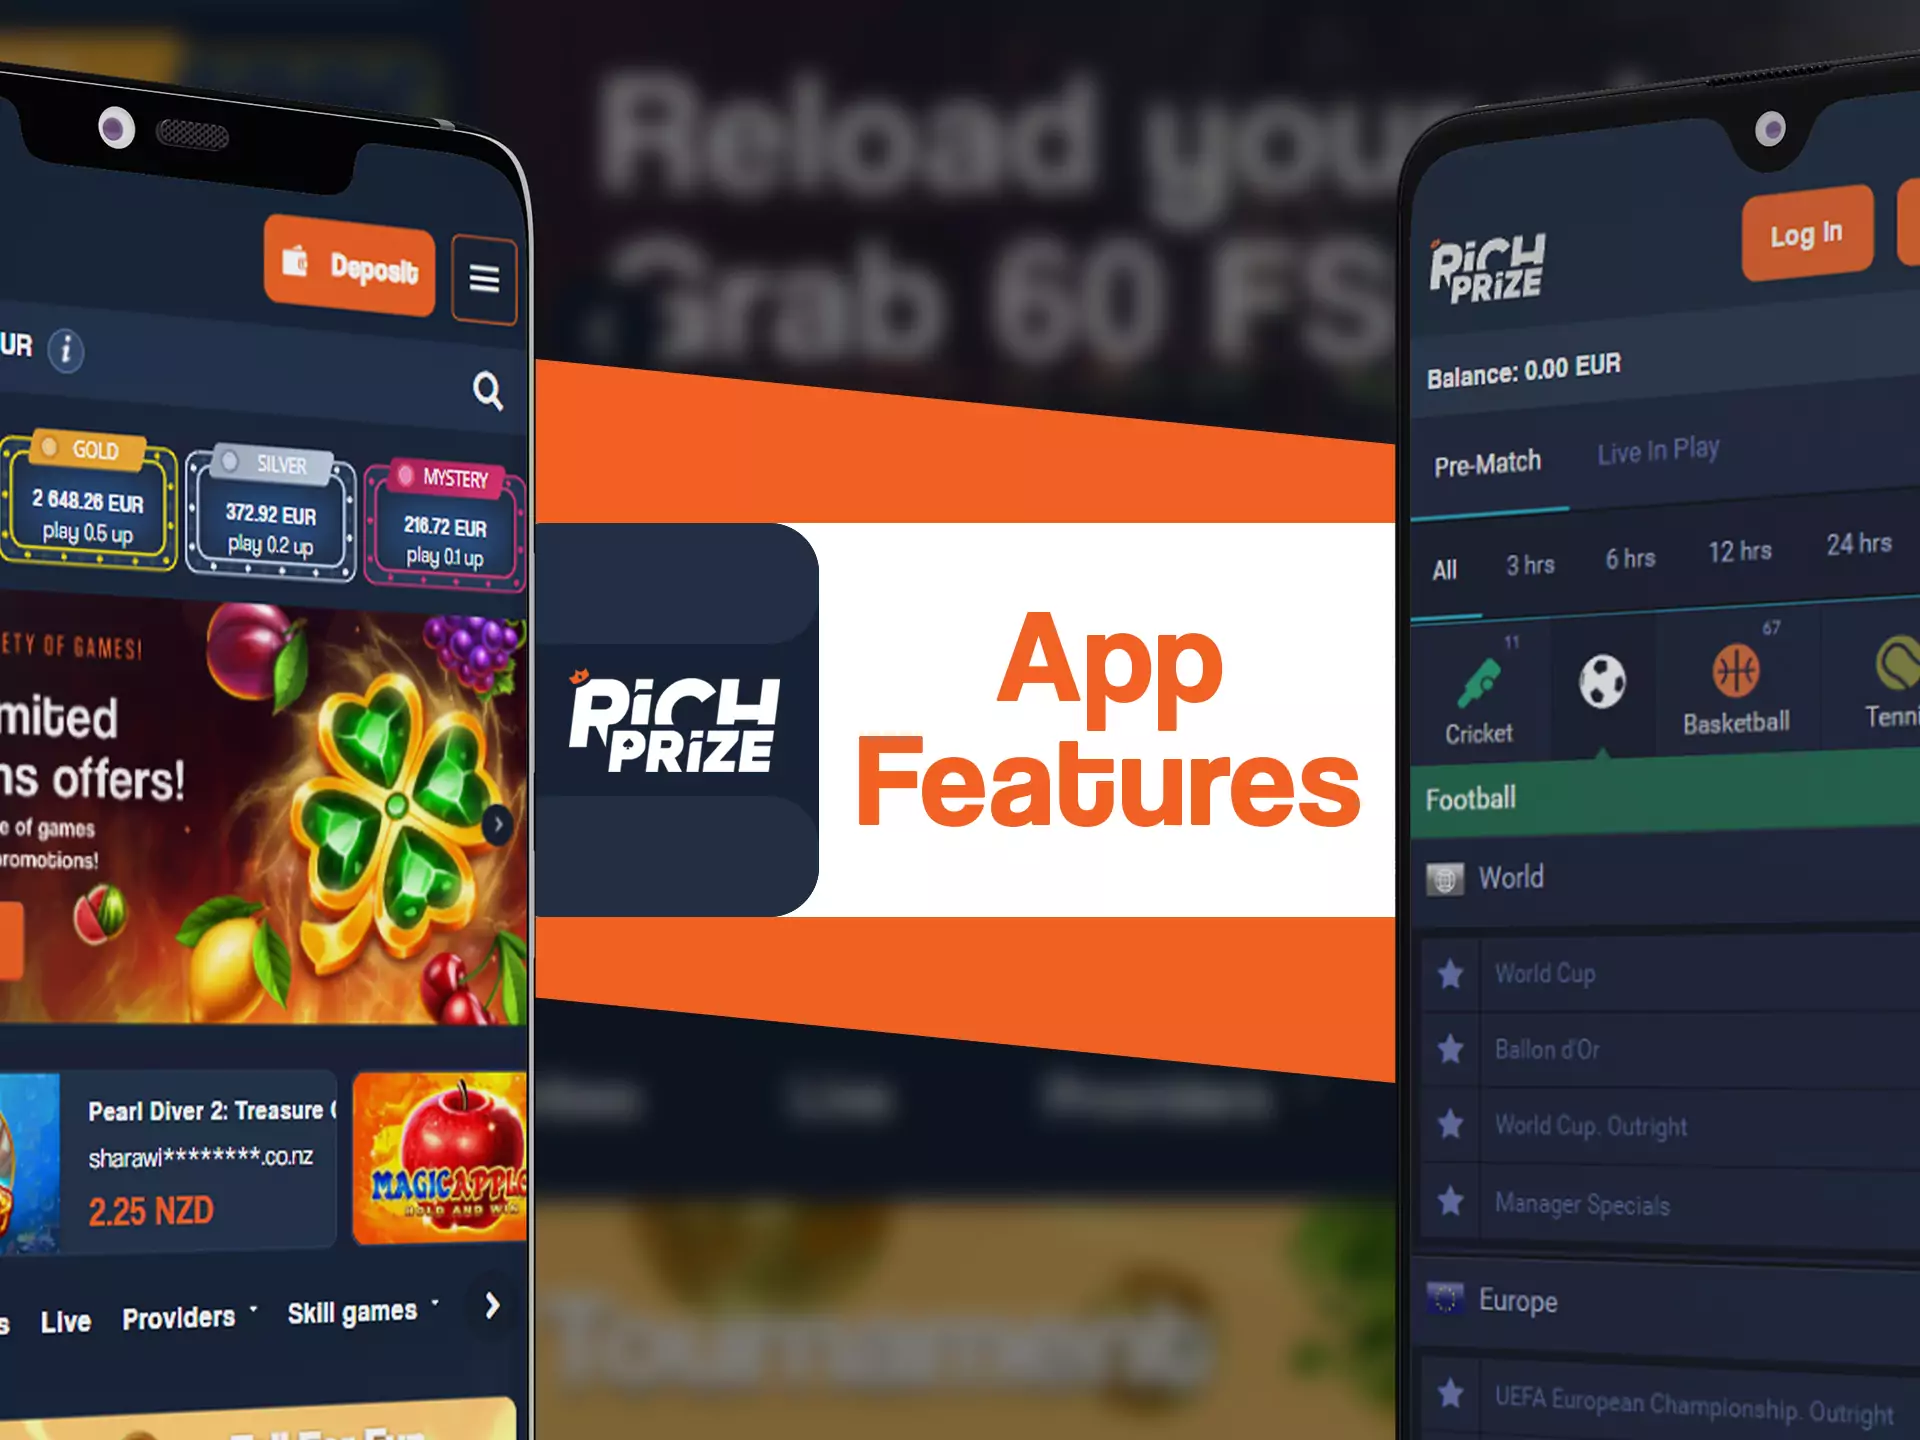 Check all of the best features of RichPrize app.